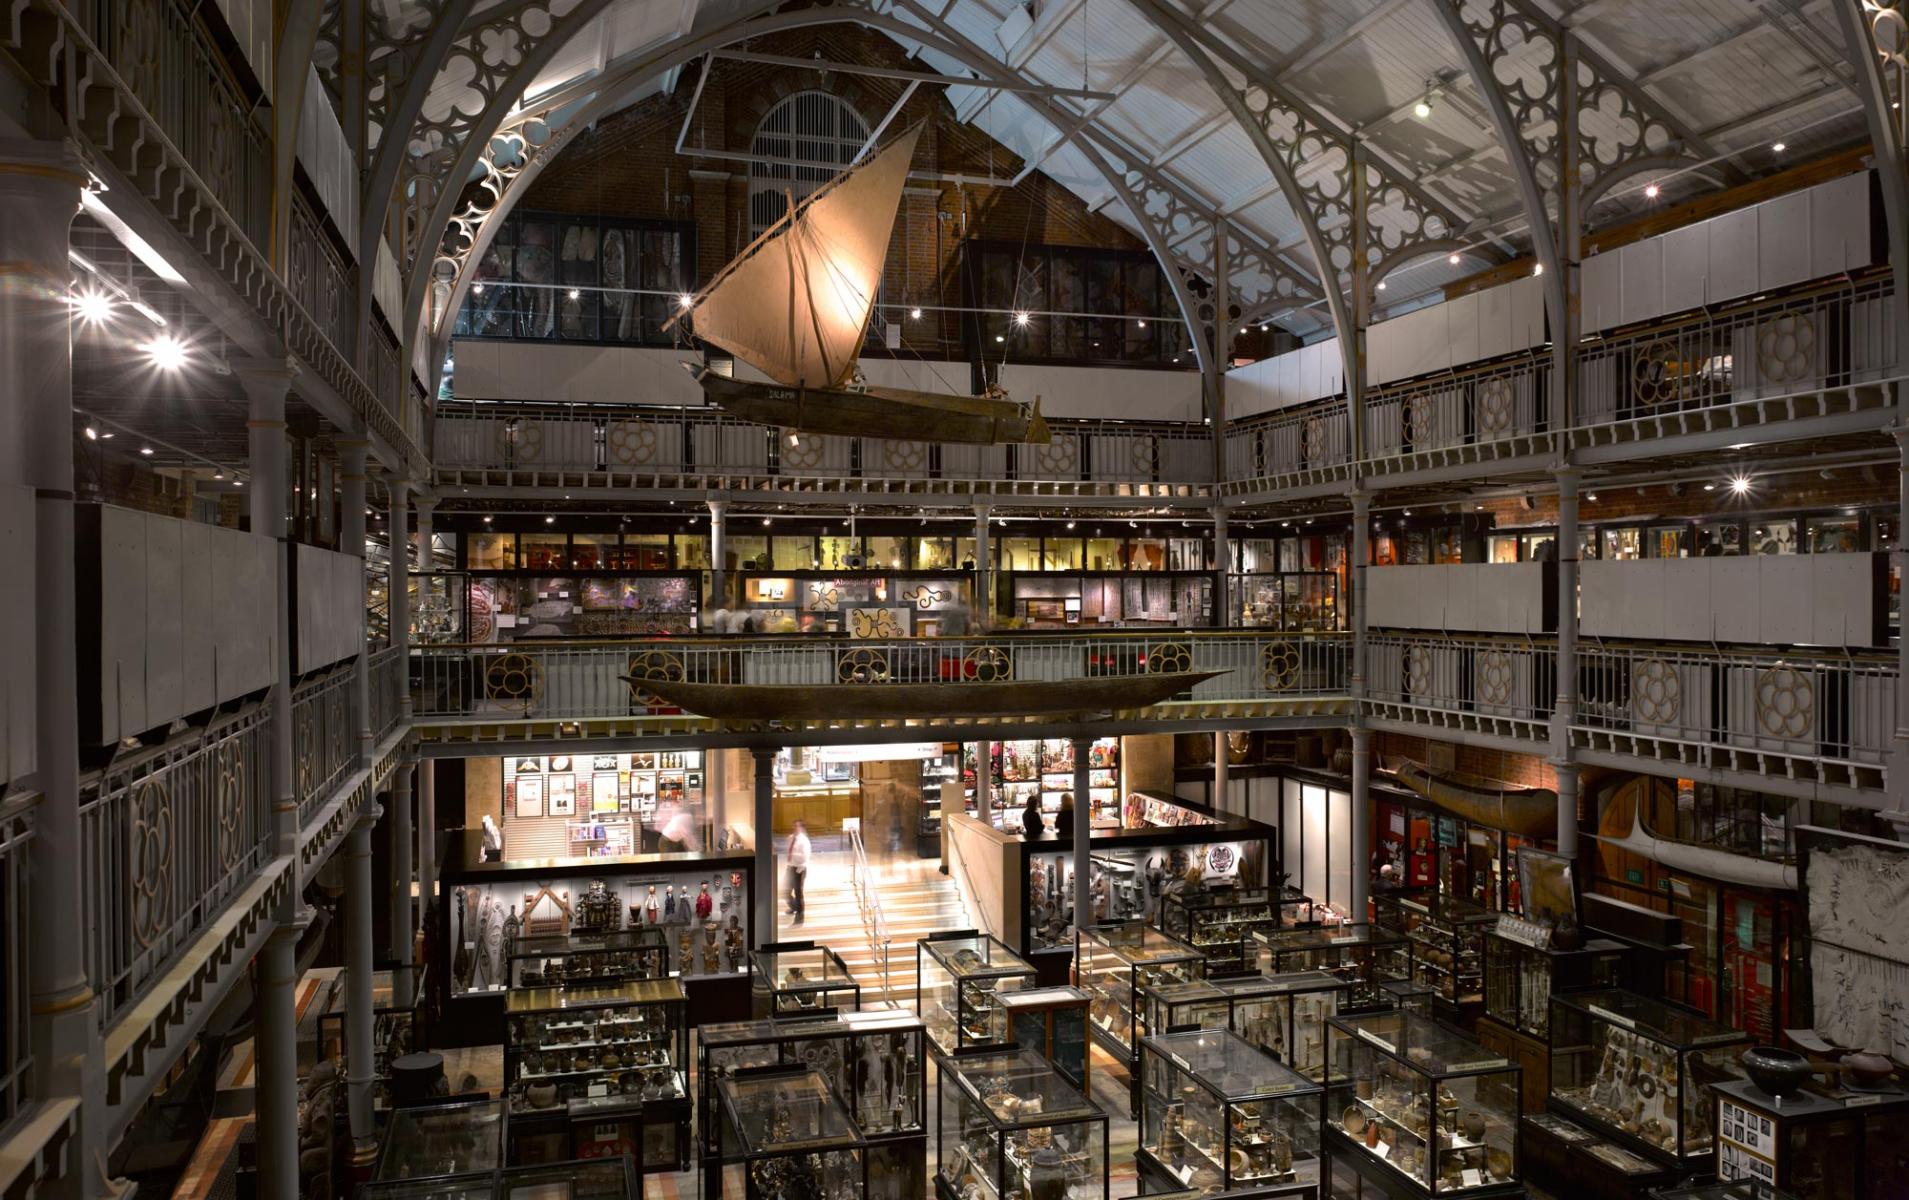 Pitt Rivers Museum Main Entrance and Refurbishment - Overall view